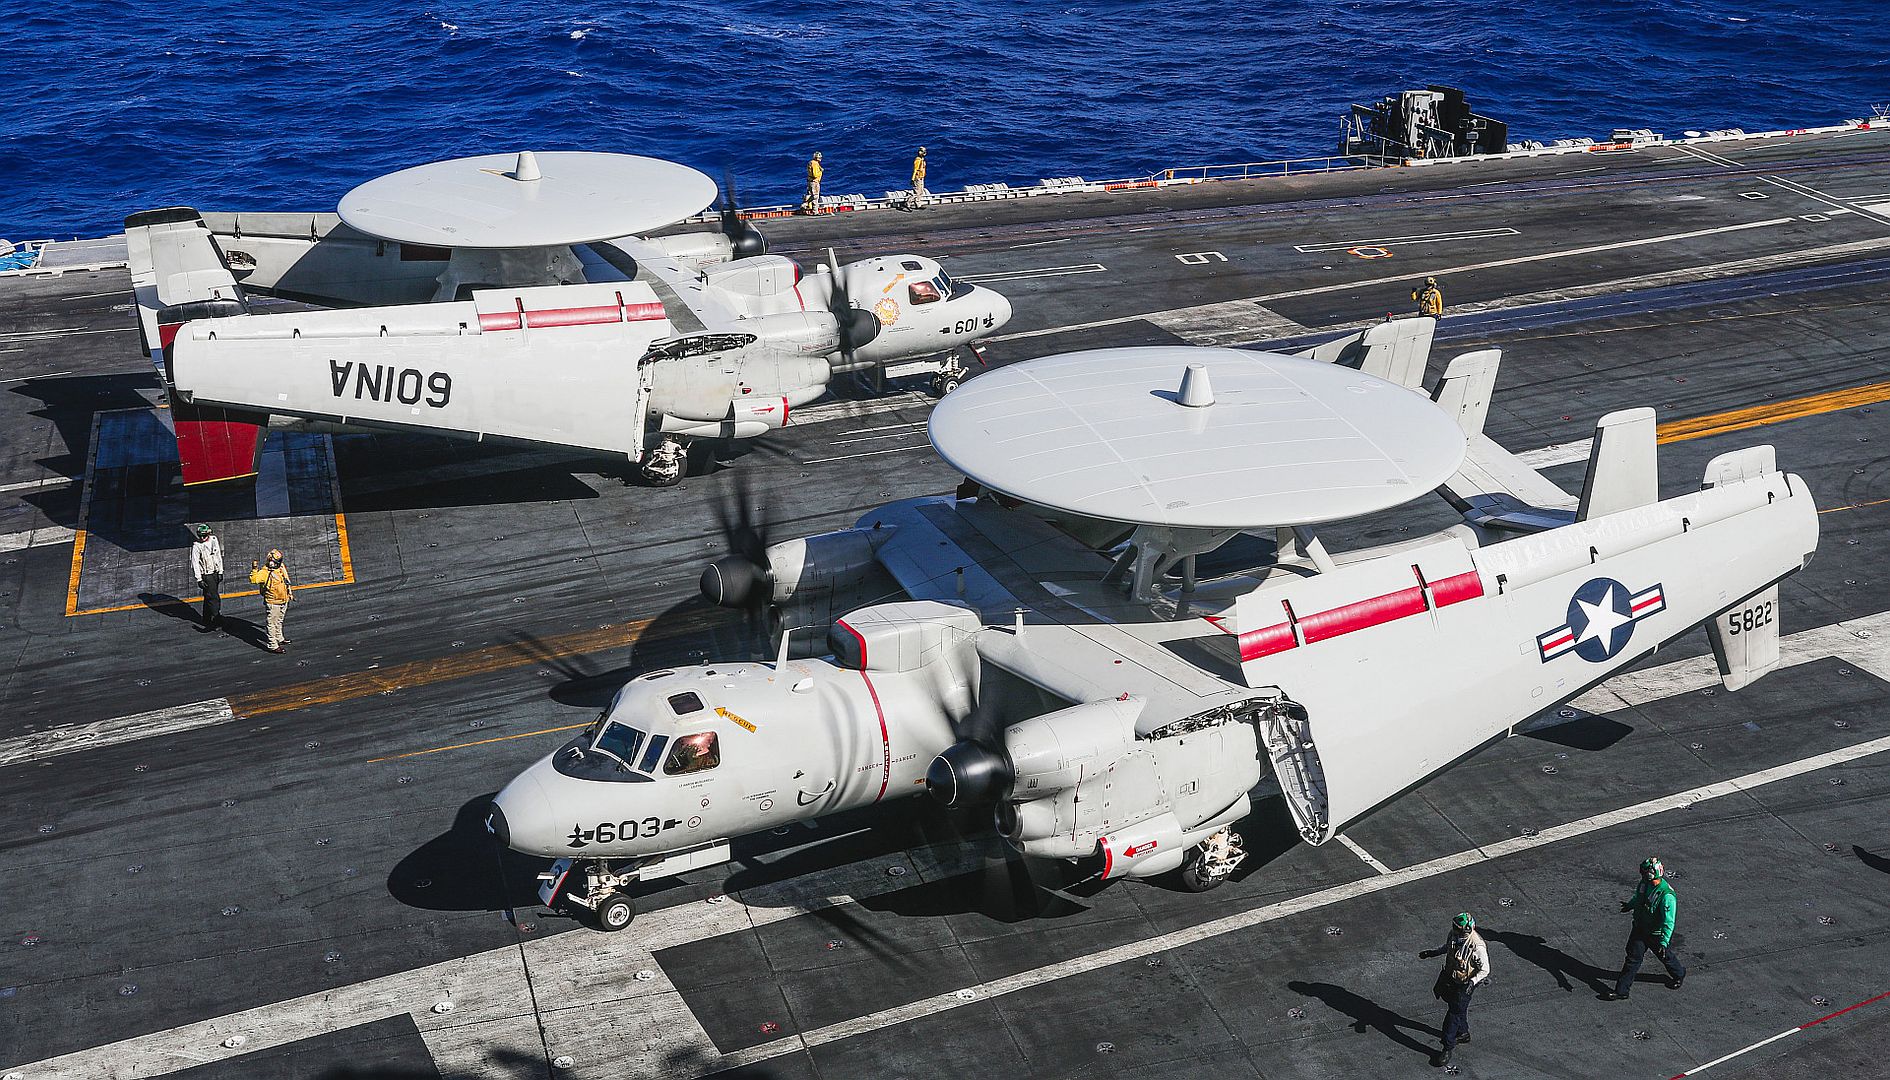 2C Hawkeyes From The Sun Kings Of Carrier Airborne Early Warning Squadron 116 Prepare To Take Off From The Flight Deck Of The Aircraft Carrier USS Nimitz